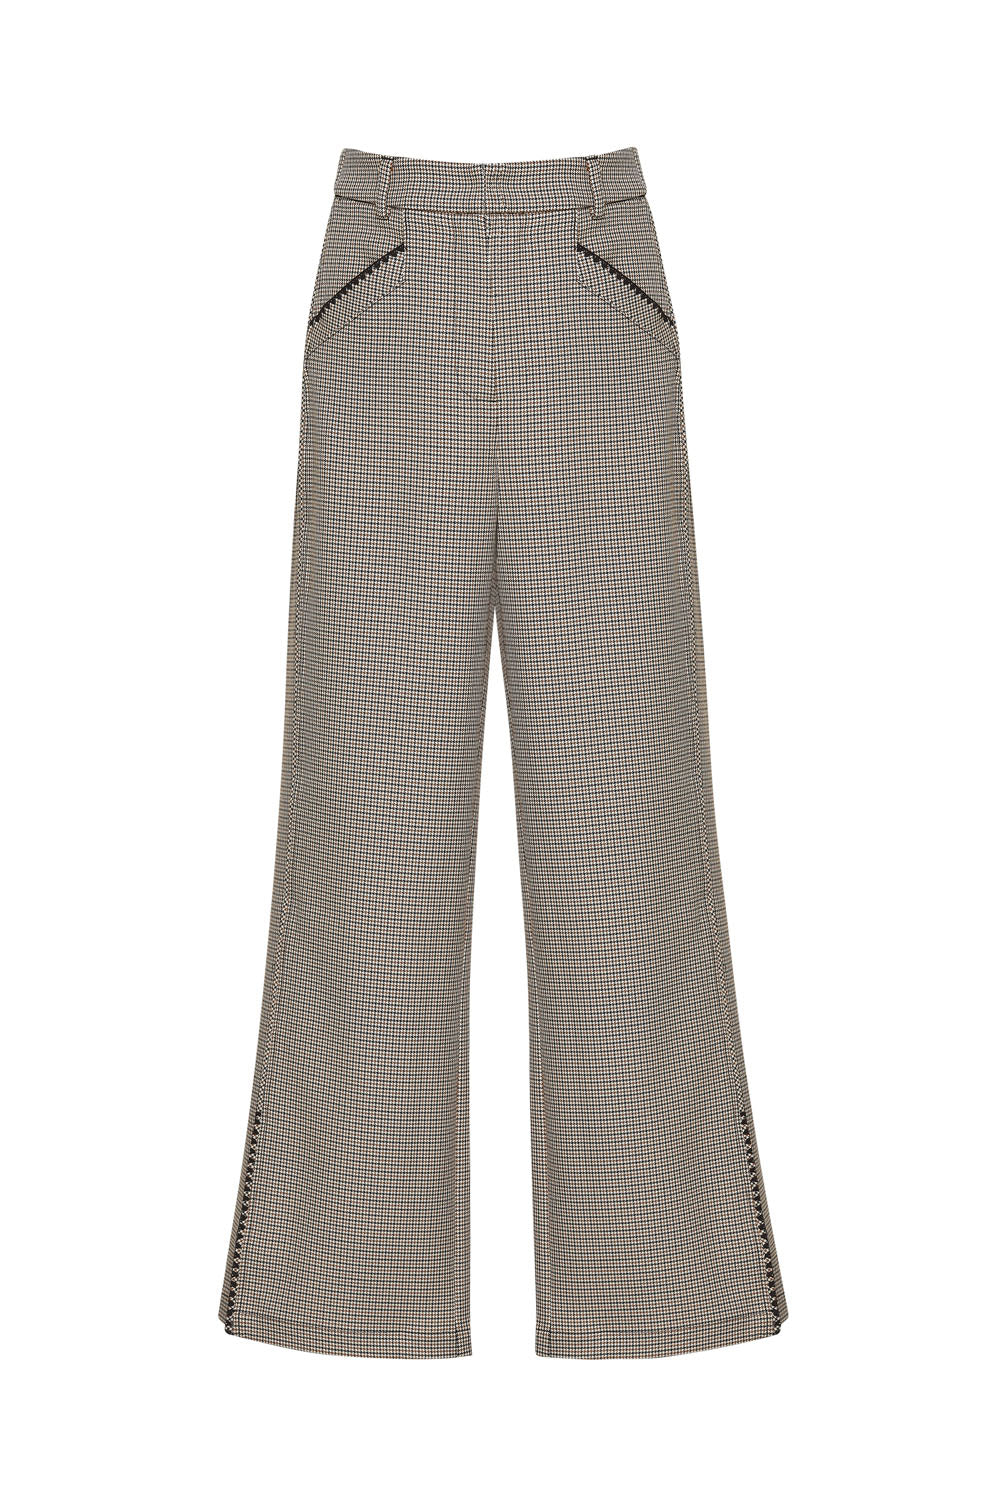 LOOBIE'S STORY AGATHA PANT - TAN HOUNDSTOOTH - THE VOGUE STORE